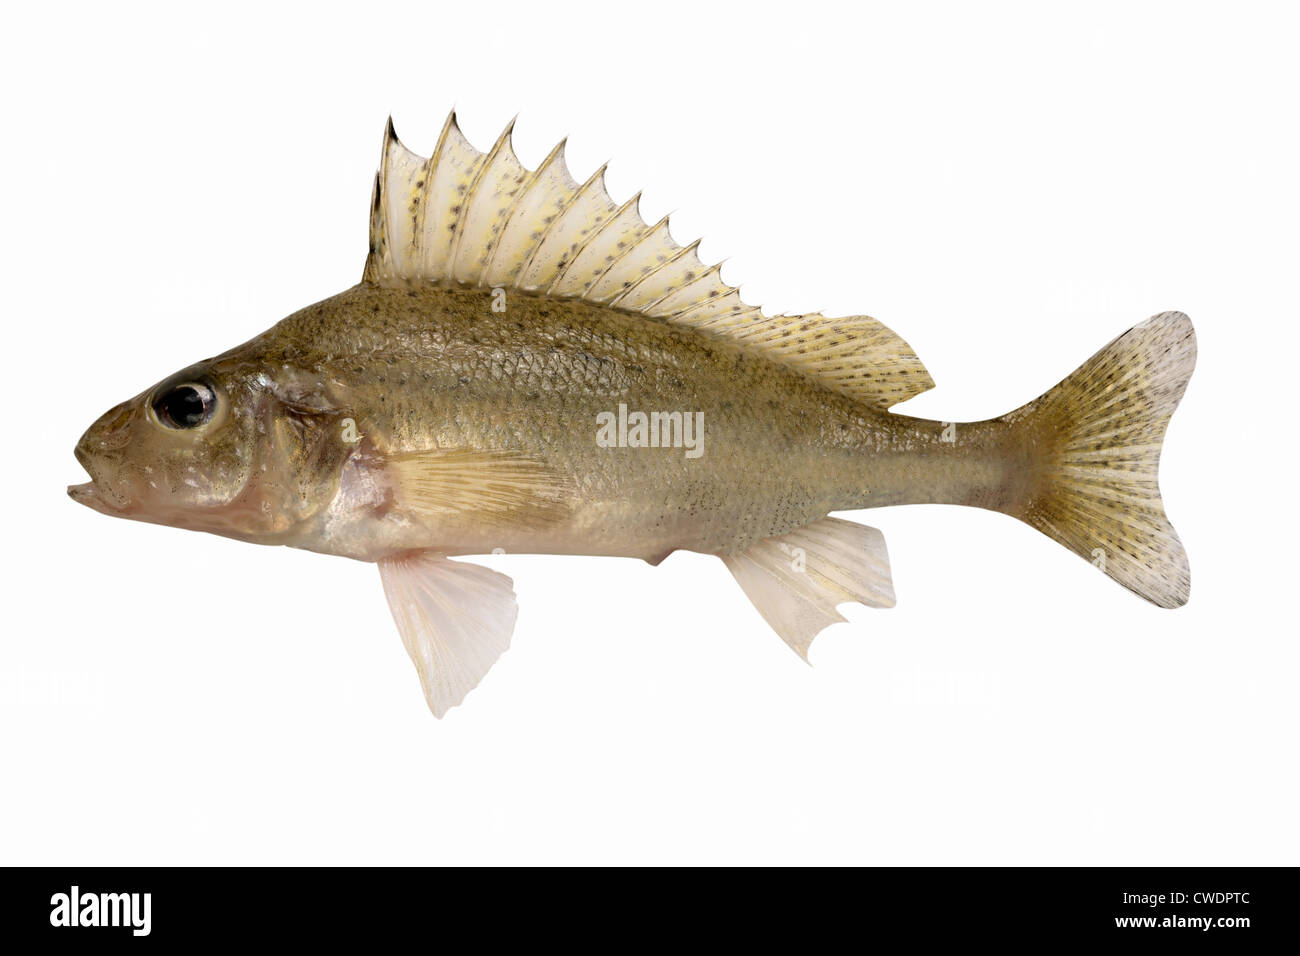 Eurasian Ruff (Gymnocephalus cernuus) or it is simple Ruff - the fresh-water fish isolated on a white background. Stock Photo